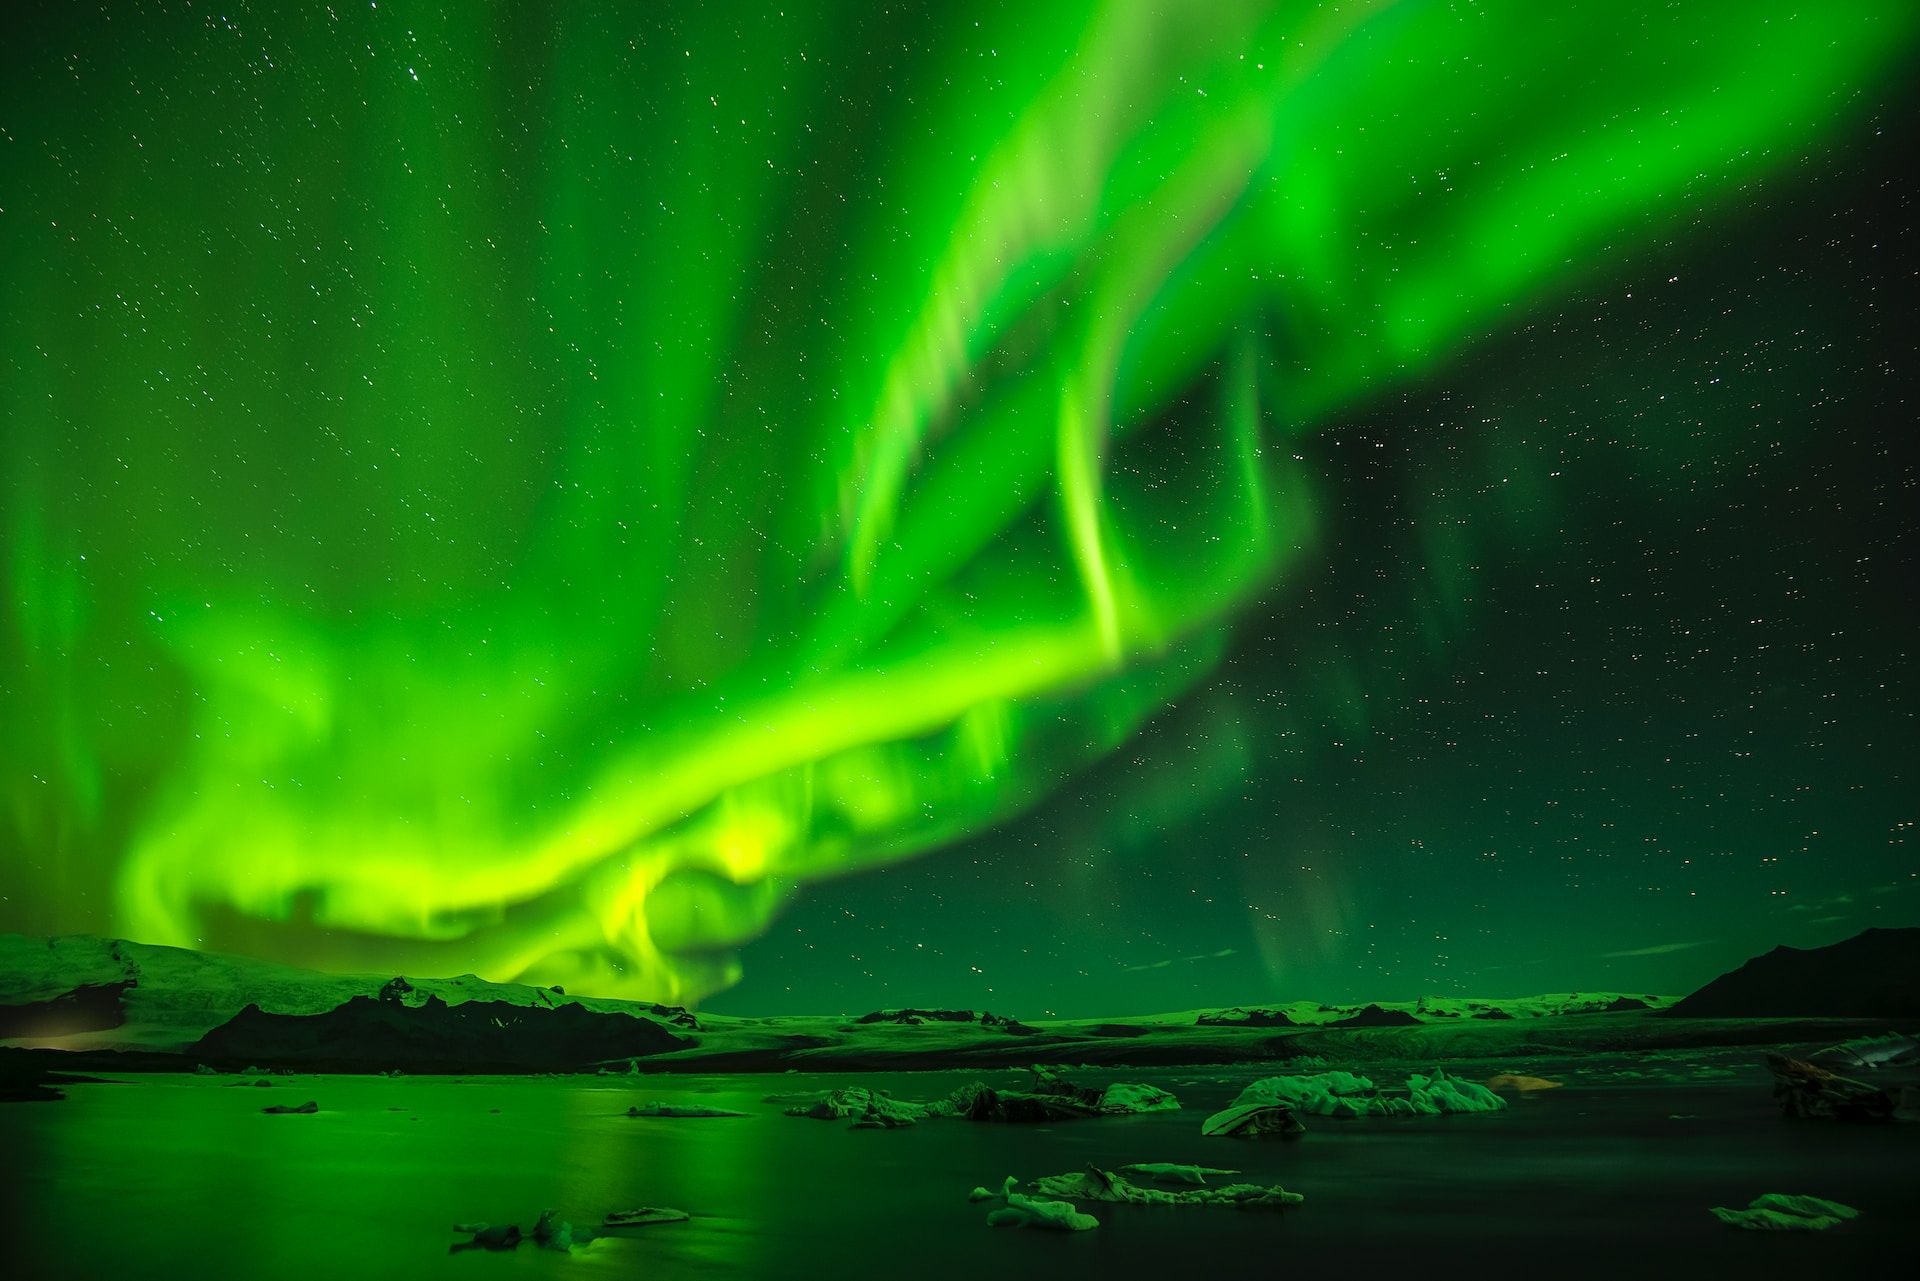 Colorful Aurora lights gracing the night sky in Iceland 